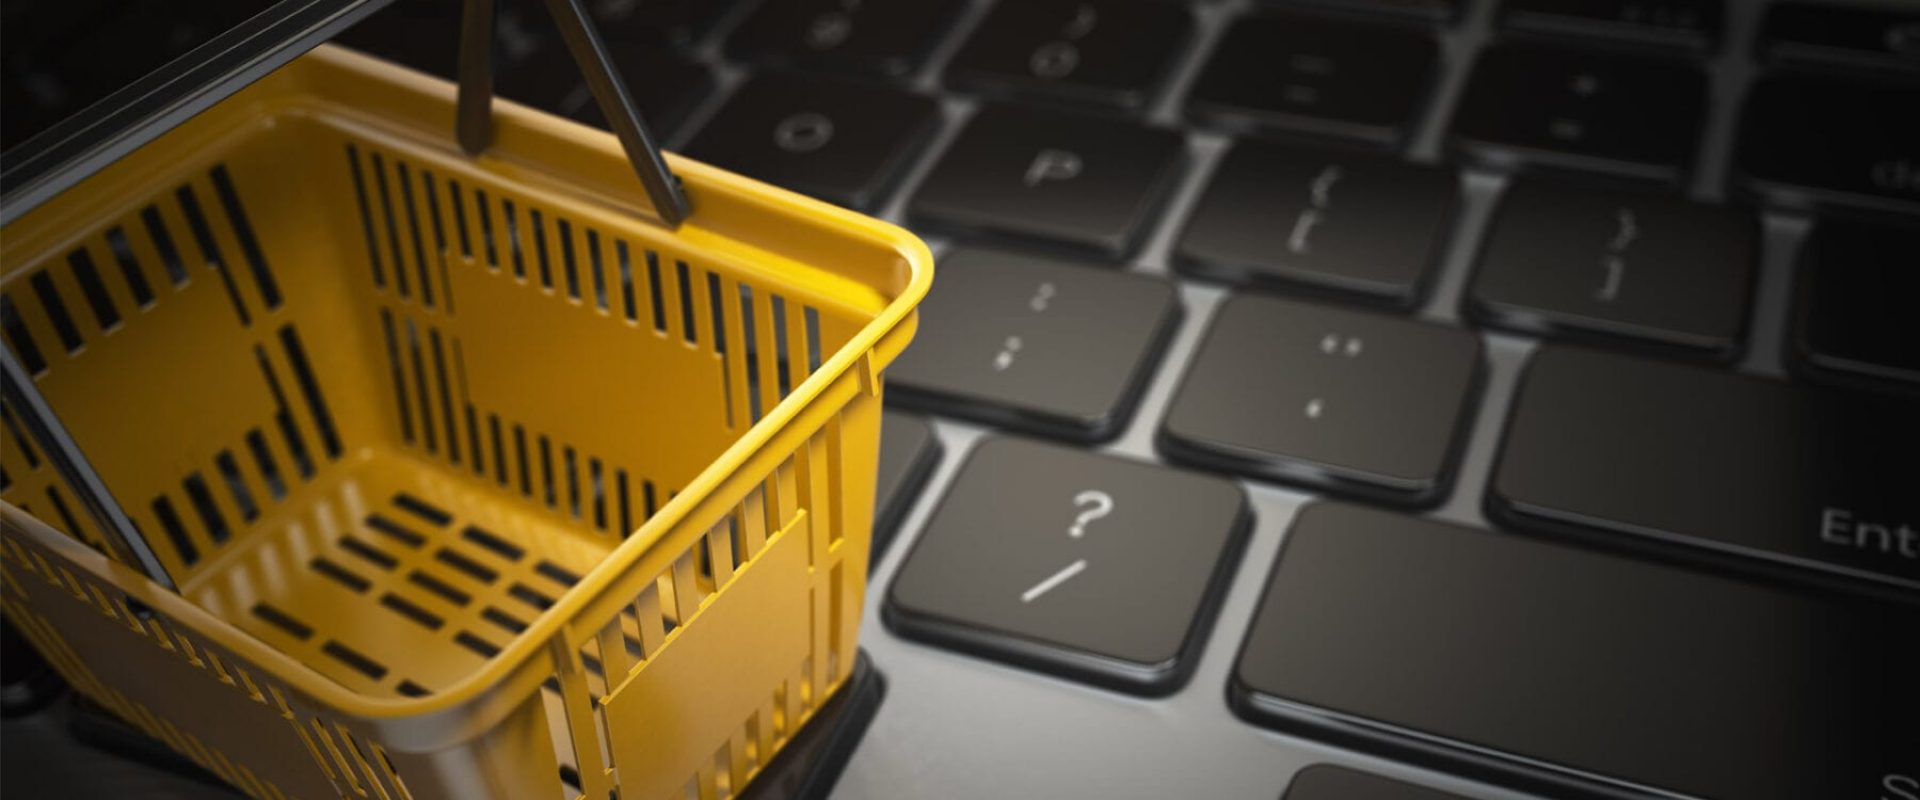 Here's 6 Tips to Improve Ecommerce